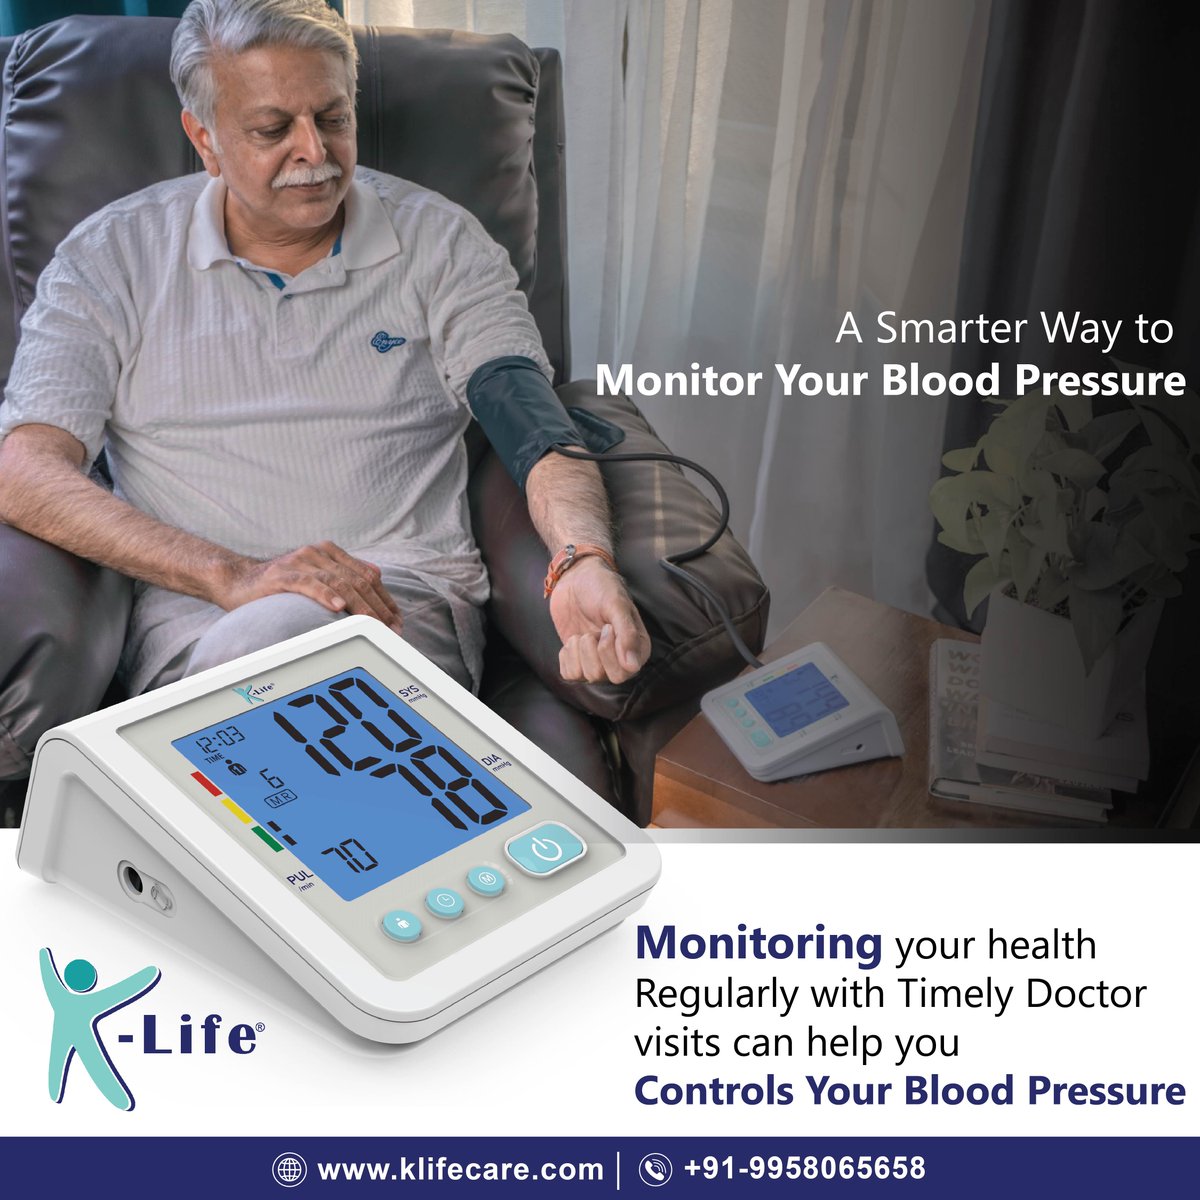 Buy Now- bit.ly/2RMpw0z
Call - 9958065658
#MonitorYourHealth #MedicalDevices #BloodPressure #BPMachine #healthcare HealthIsWealth #LiveHealthy #HealthConcious #healthylife #myhealthybeauty #healthproducts #healthmonitors #selfcare #india #medical #BPM #Klife